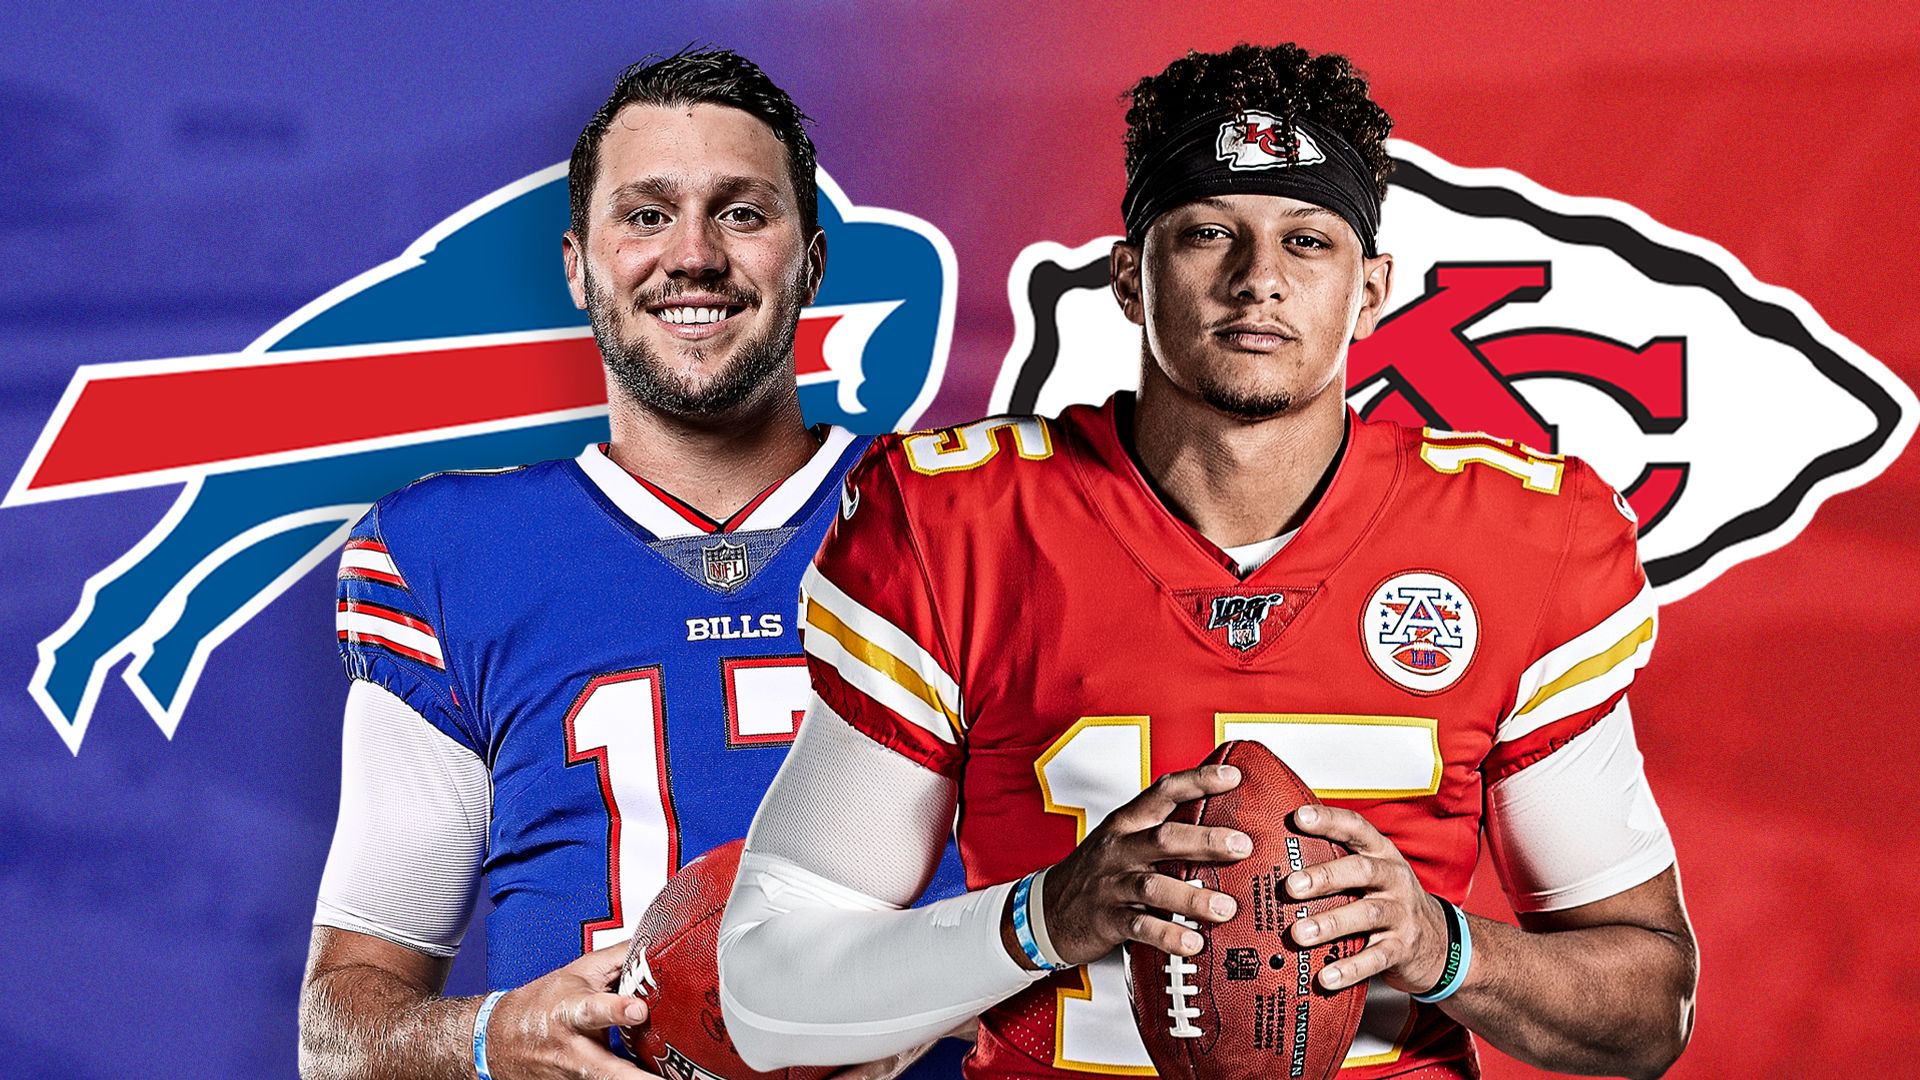 Allen vs Mahomes: Superstars of the NFL and its next great rivalry